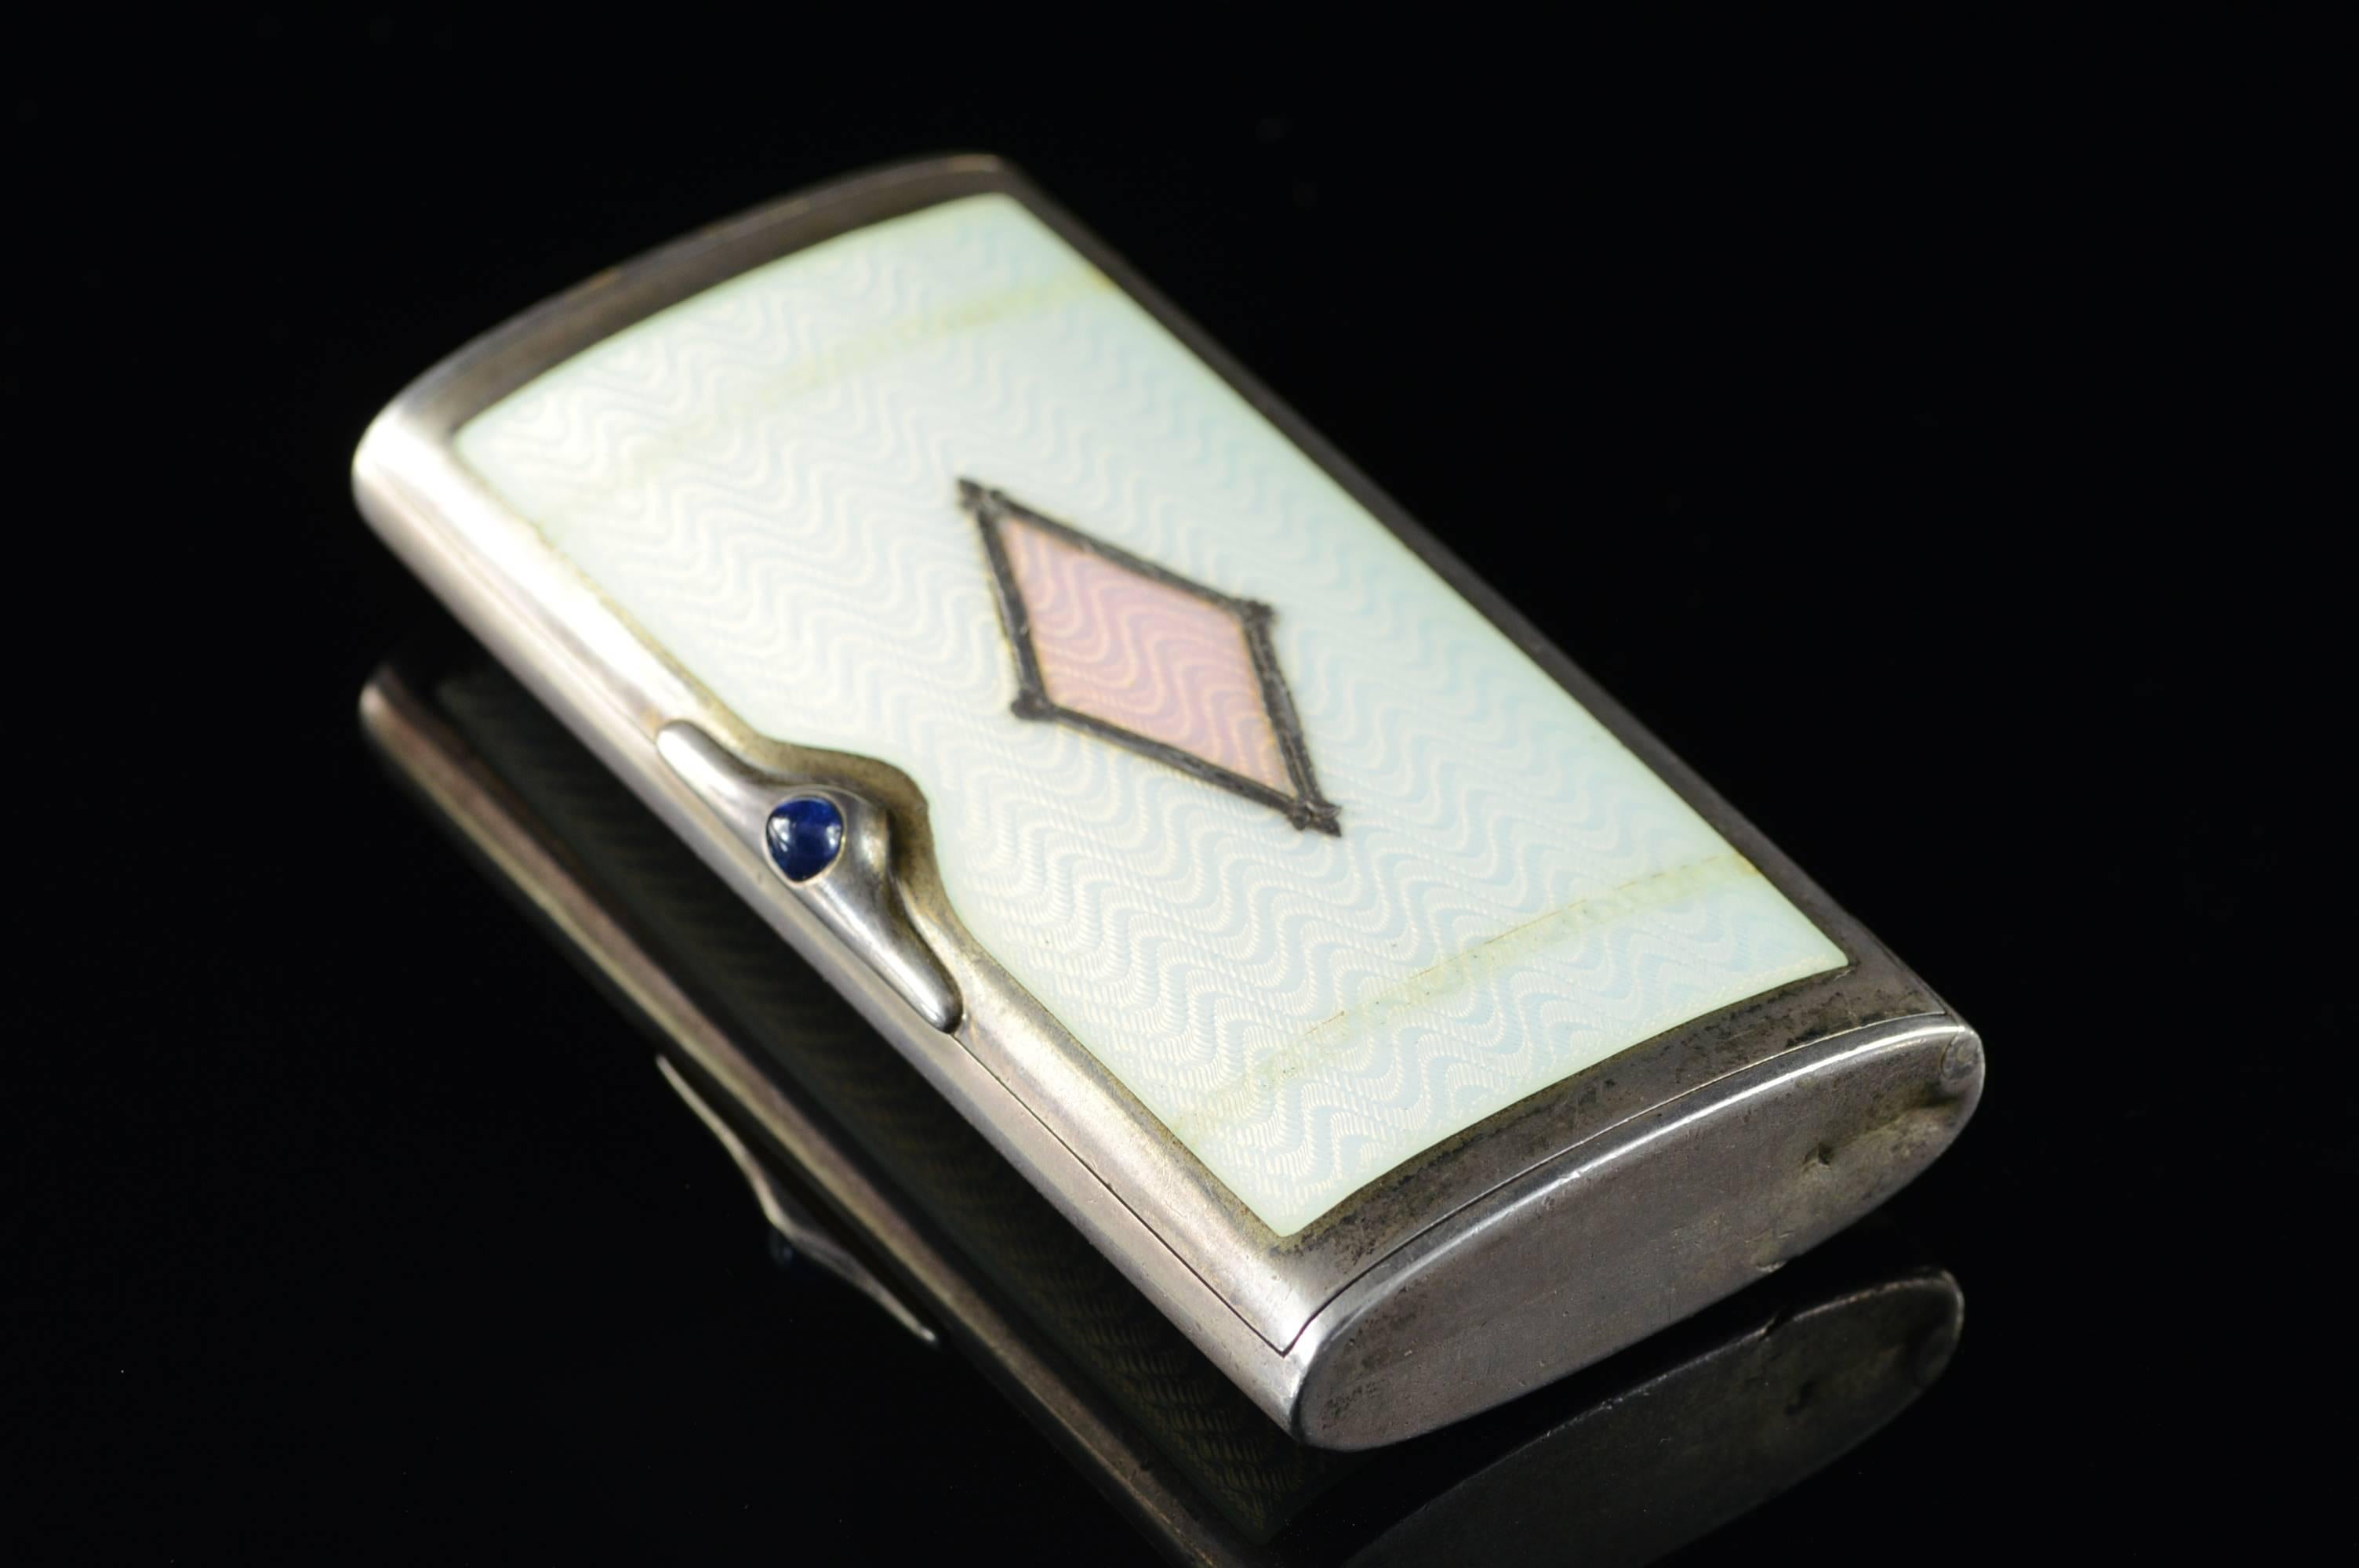 ·Item: 900 Silver Vintage Wavy Patterned Enamel Cigarette Case Fine Silver

·Era: 1940s

·Composition: 900 Silver Marked/Tested

·Condition: This enamel has slight damage to the bottom, as can be seen in the images

·Weight: 130g